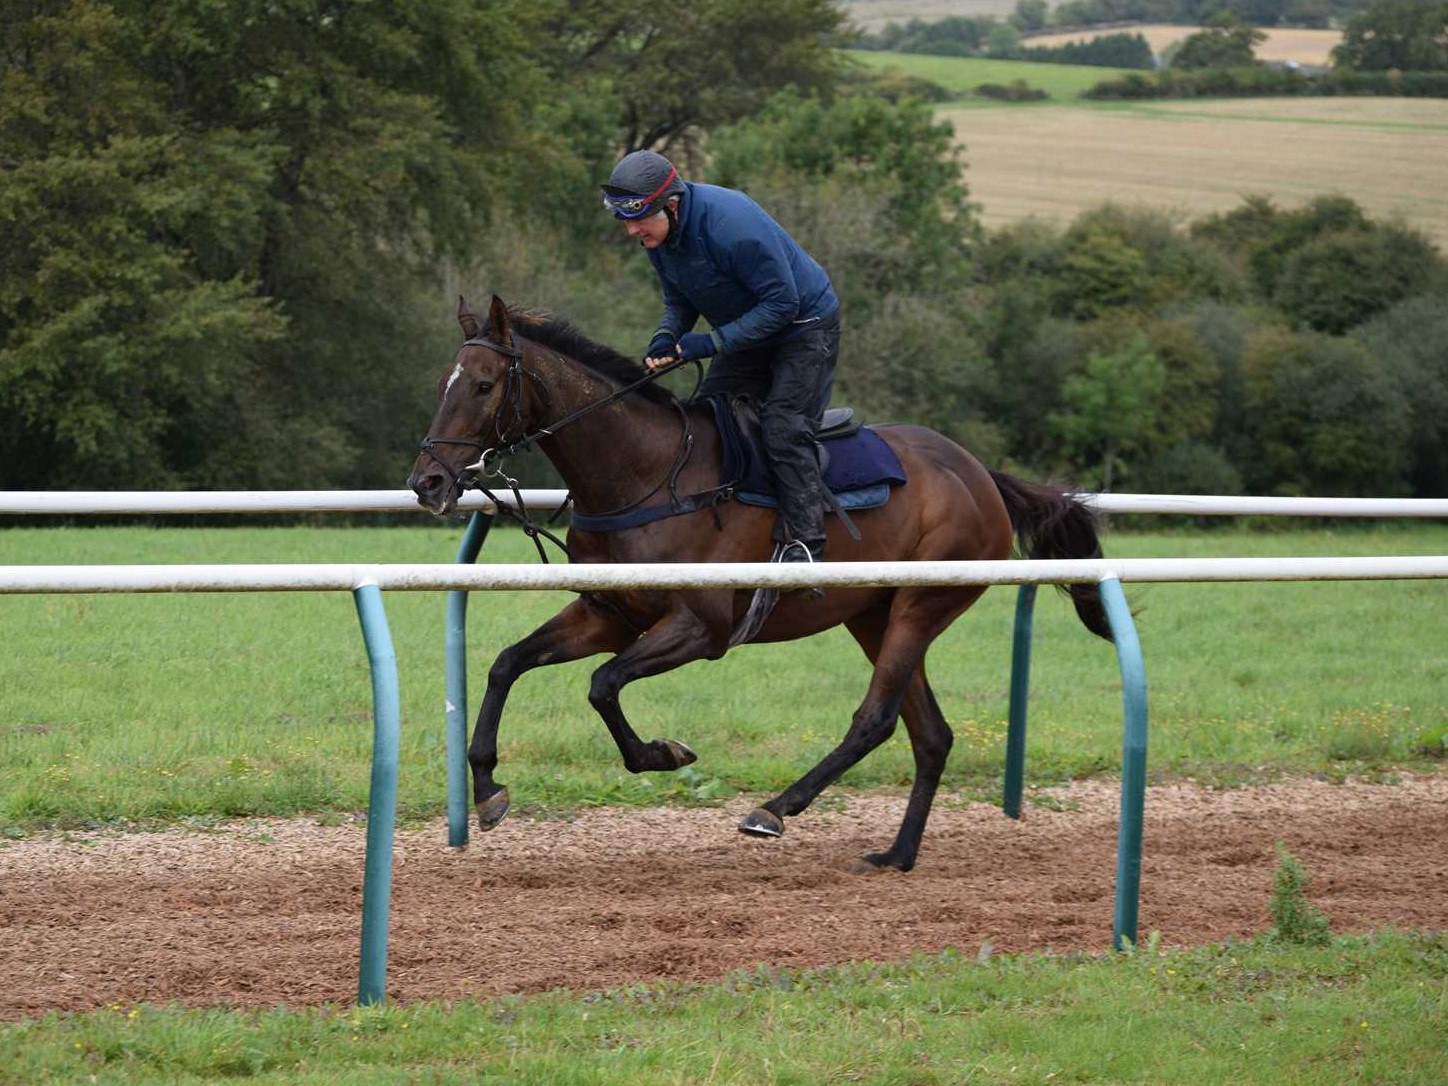 Loose Chips retaining his enthusiasm on the gallops!